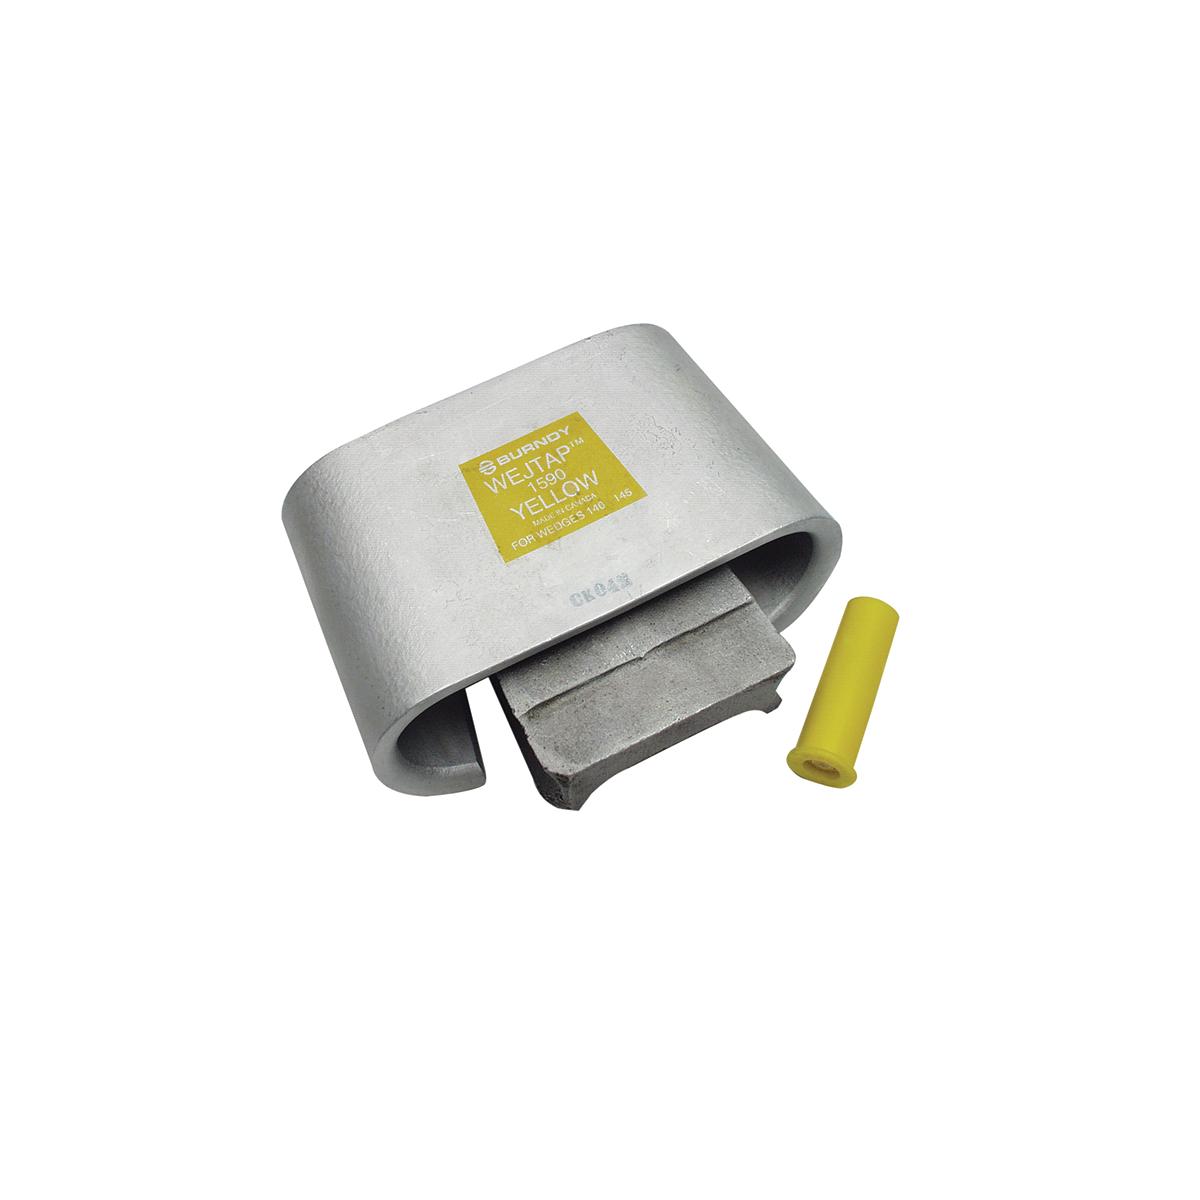 Hubbell WCY142PB Aluminum Overhead Wedge Tap Connector packaged with Yellow Power Booster. 